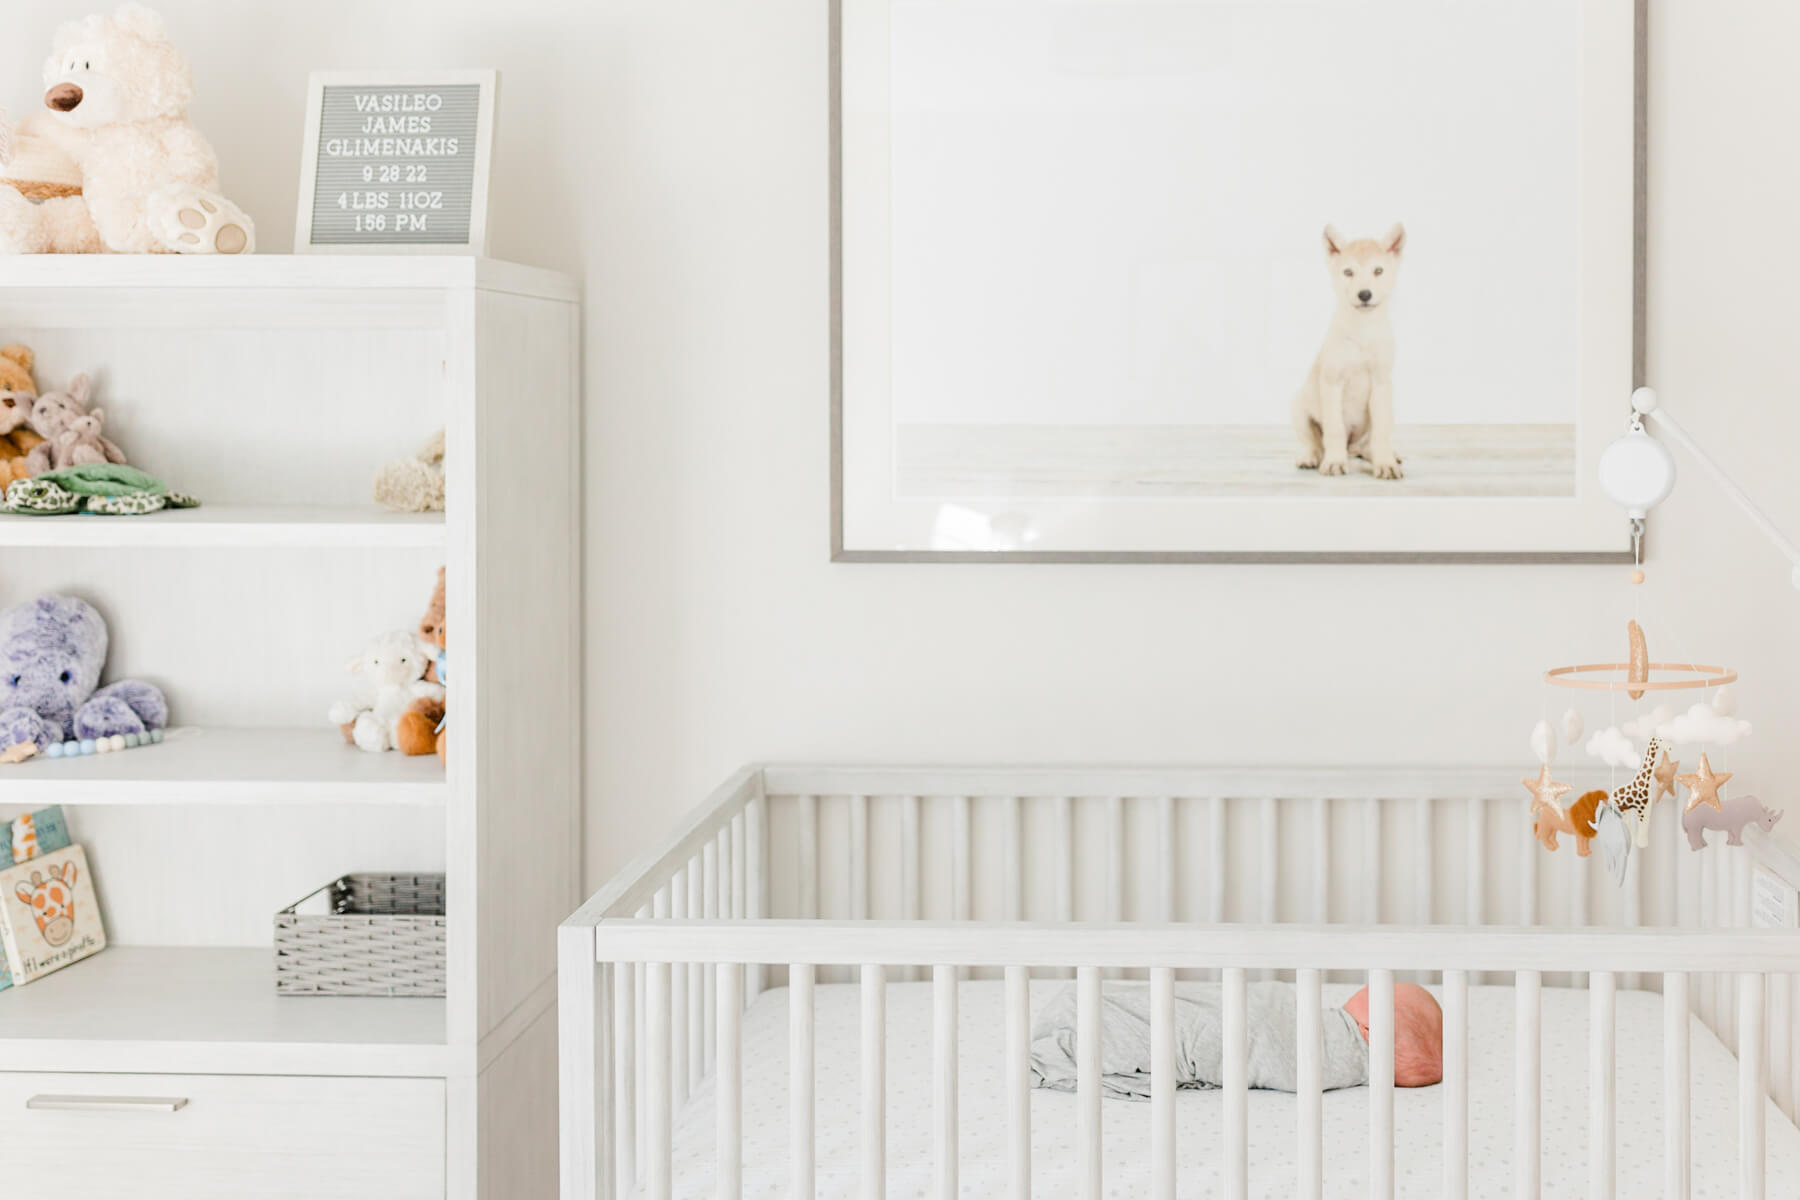 A newborn baby sleeps in their white animal themed nursery and crib Cambridge baby stores